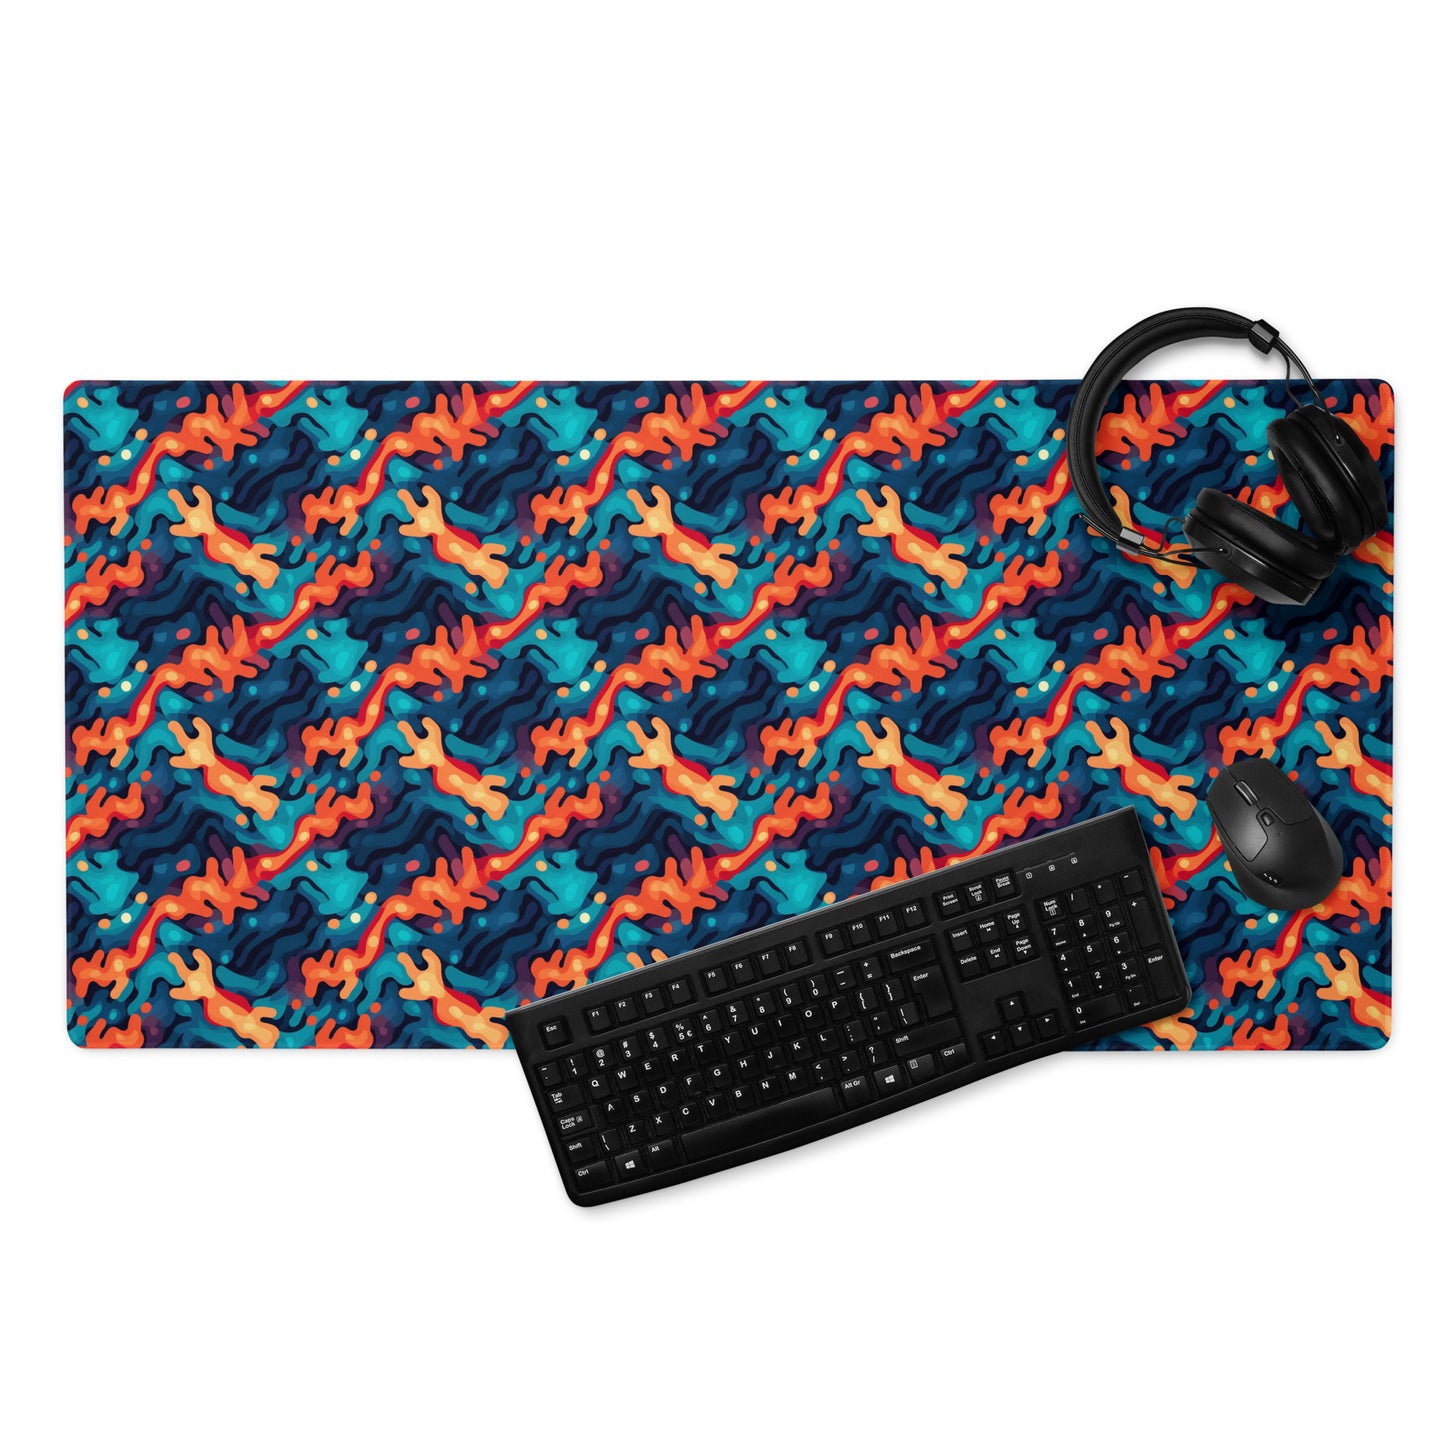 A 36" x 18" desk pad with a wavy woven pattern on it displayed with a keyboard, headphones and a mouse. Red and Blue in color.